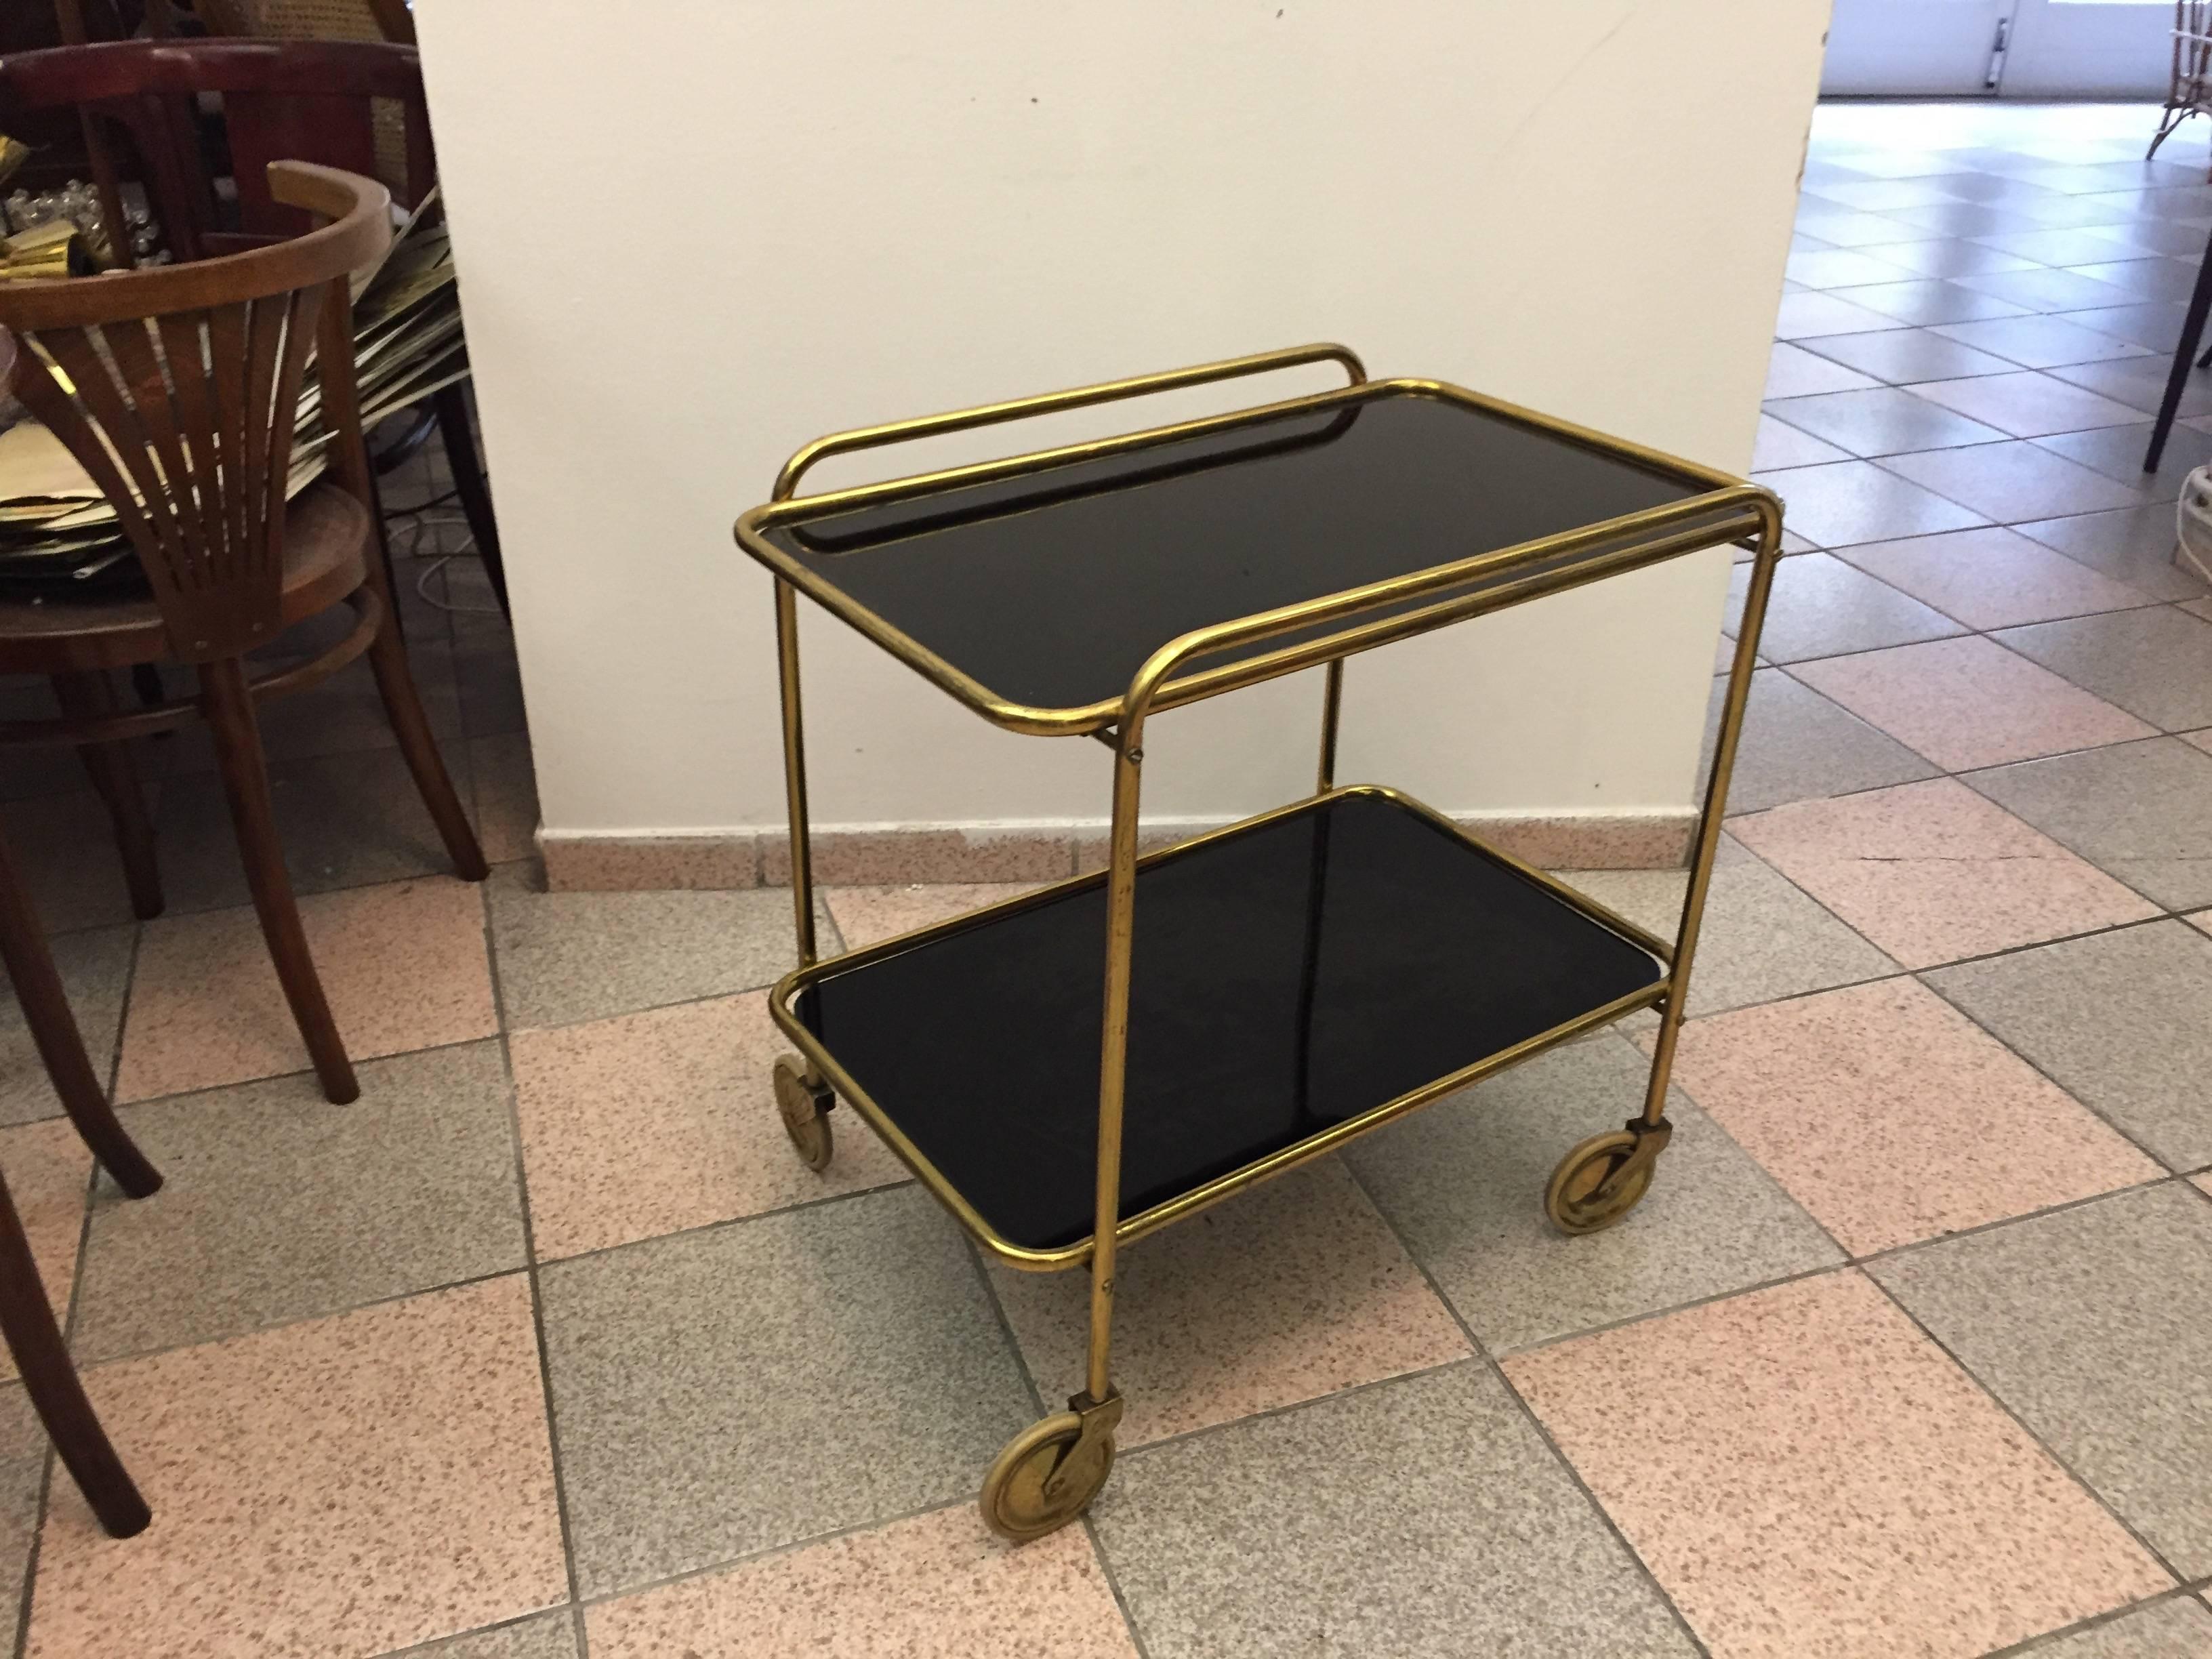 Brass frame on four wheels with two black glass plates, made in Italy in the 1960s.
Original condition.